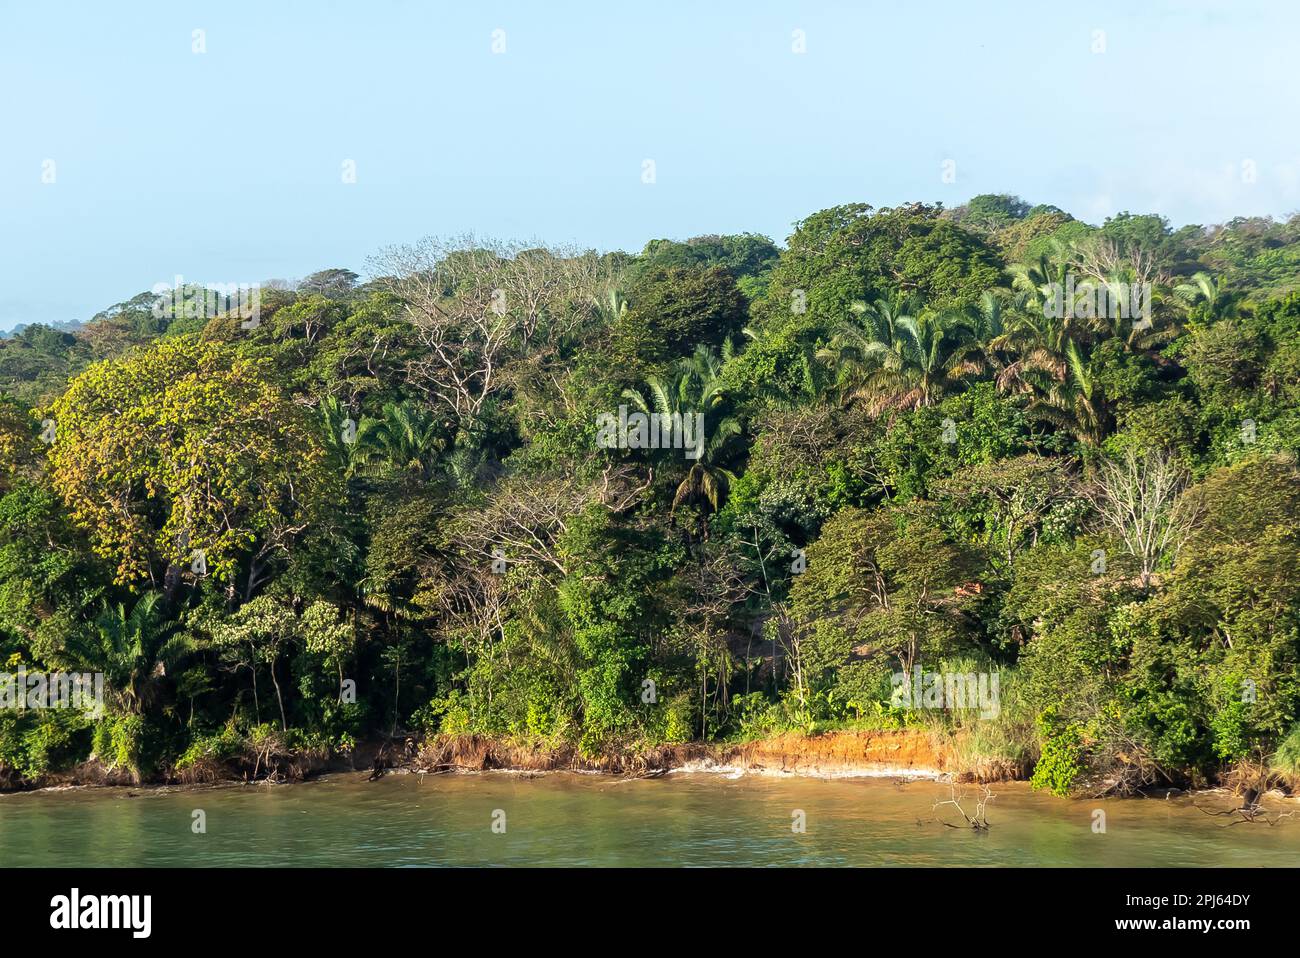 Transiting the Panama Canal: rainforest on the banks of the Panama Canal Stock Photo